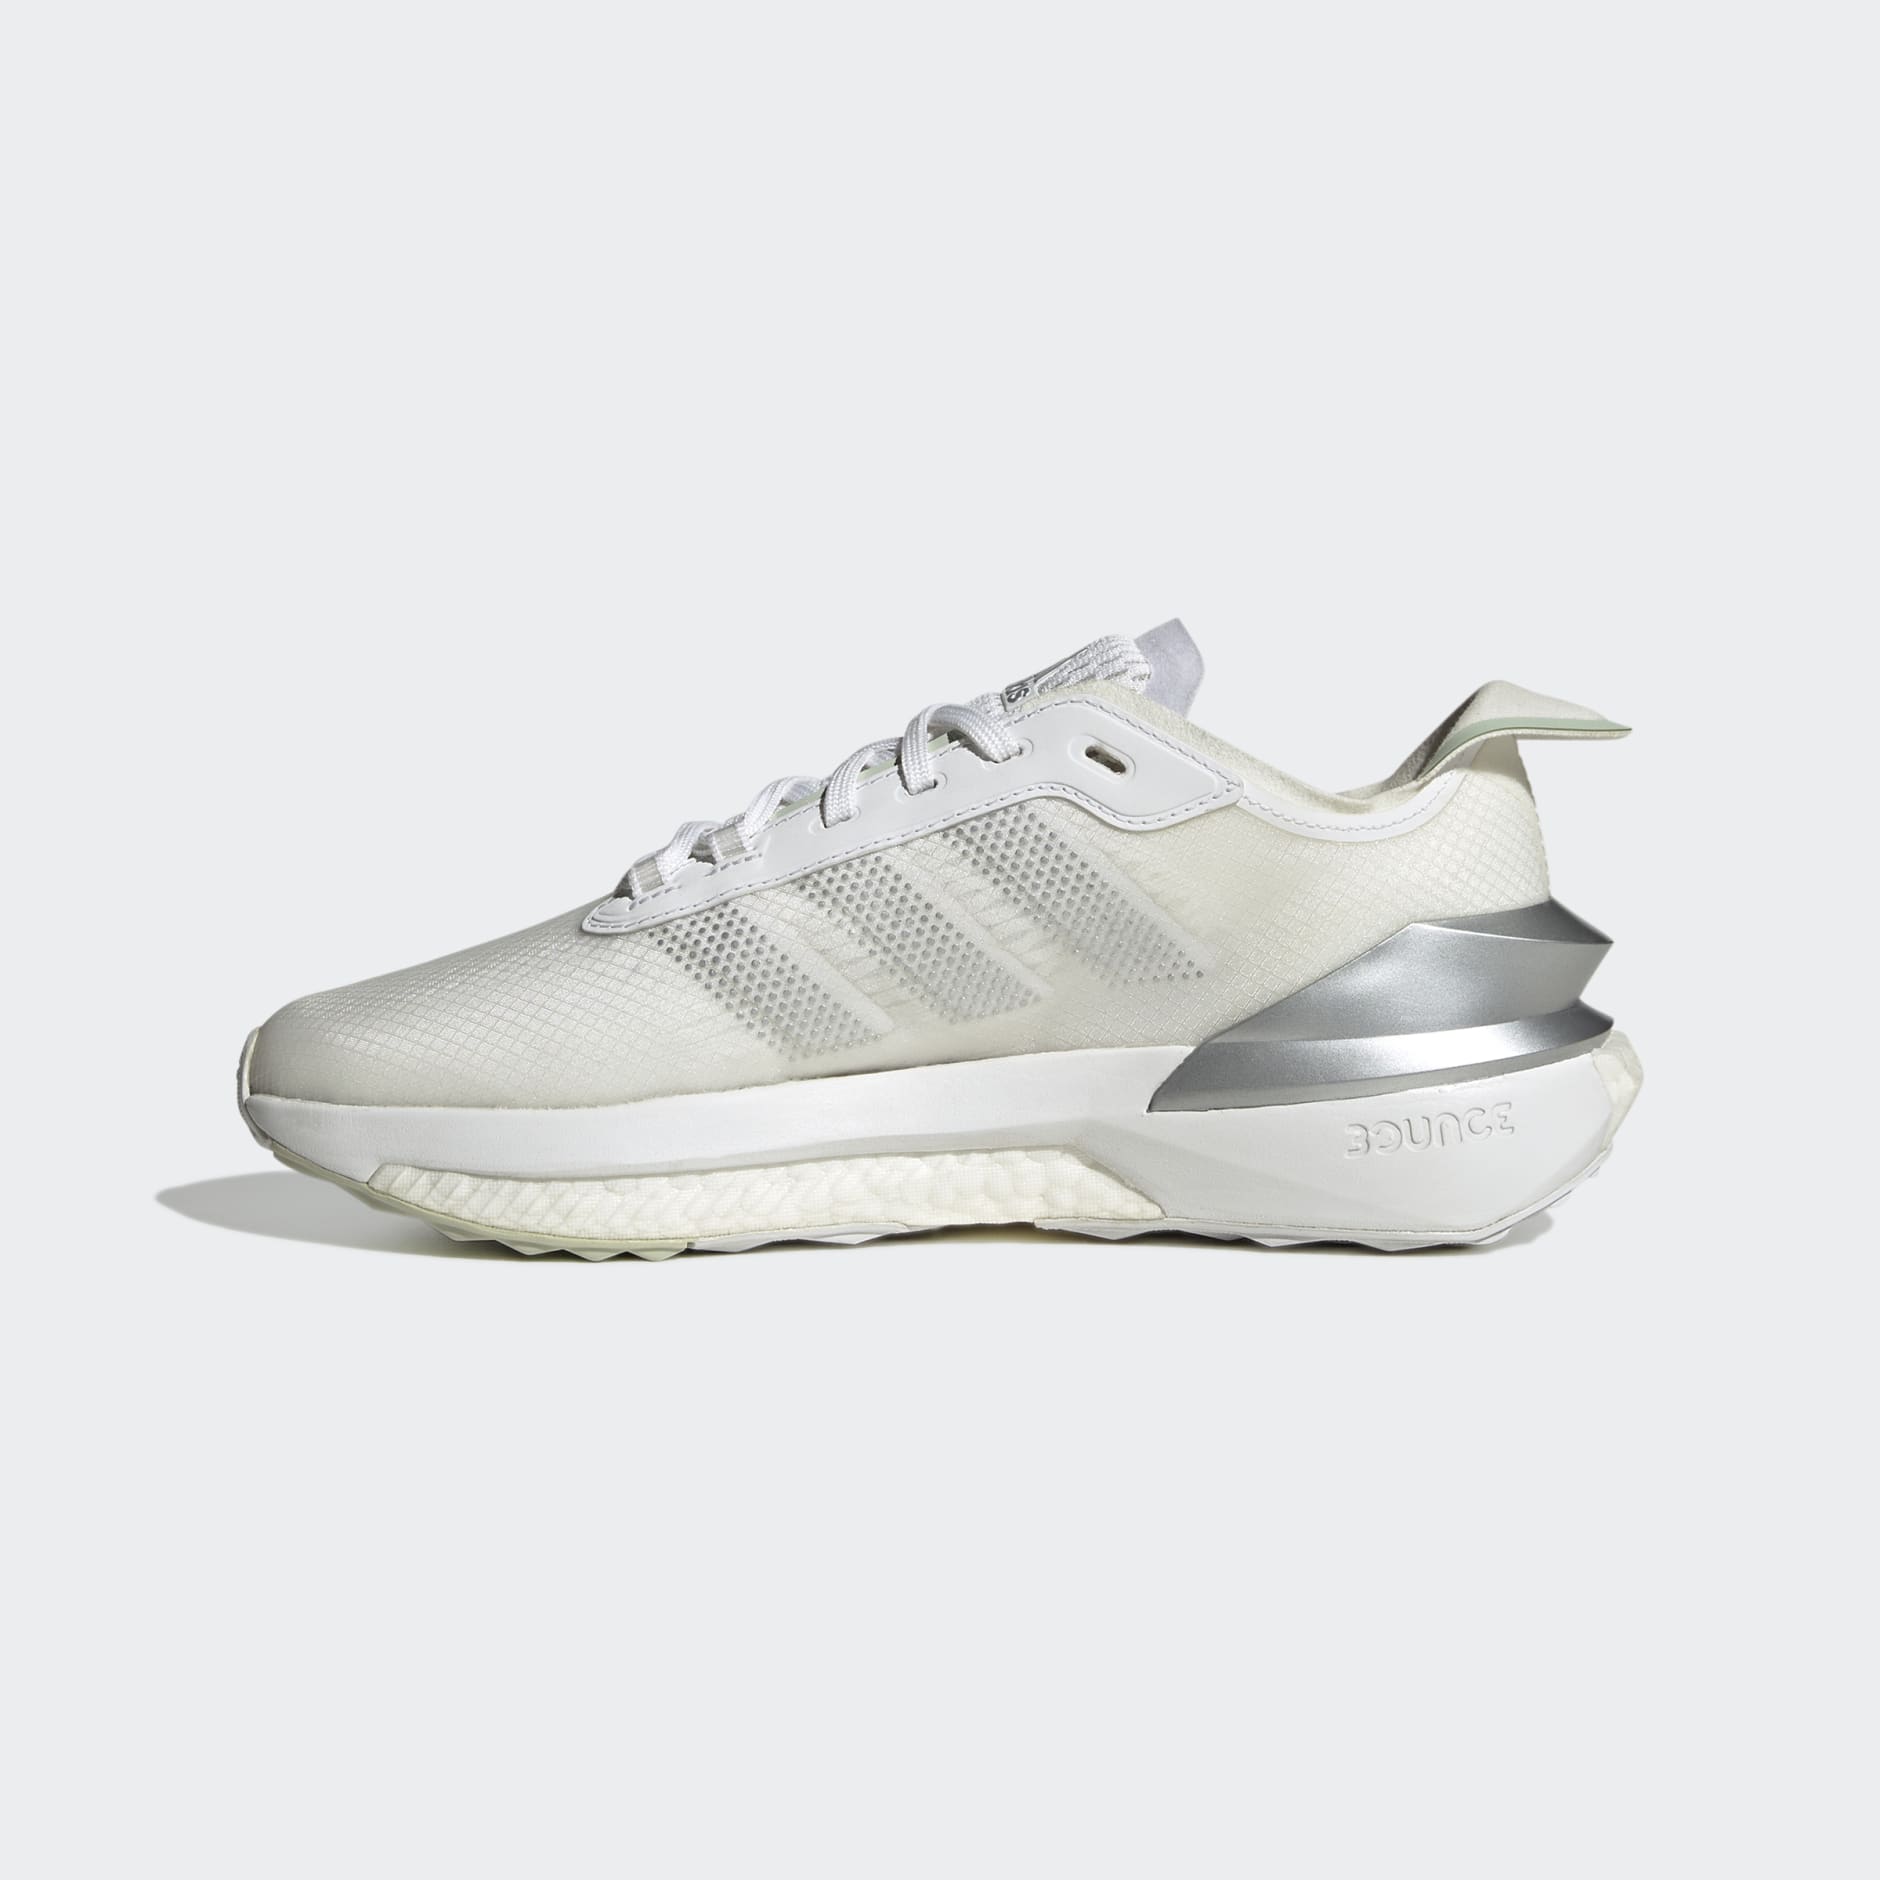 Shoes - Avryn Shoes - White | adidas South Africa